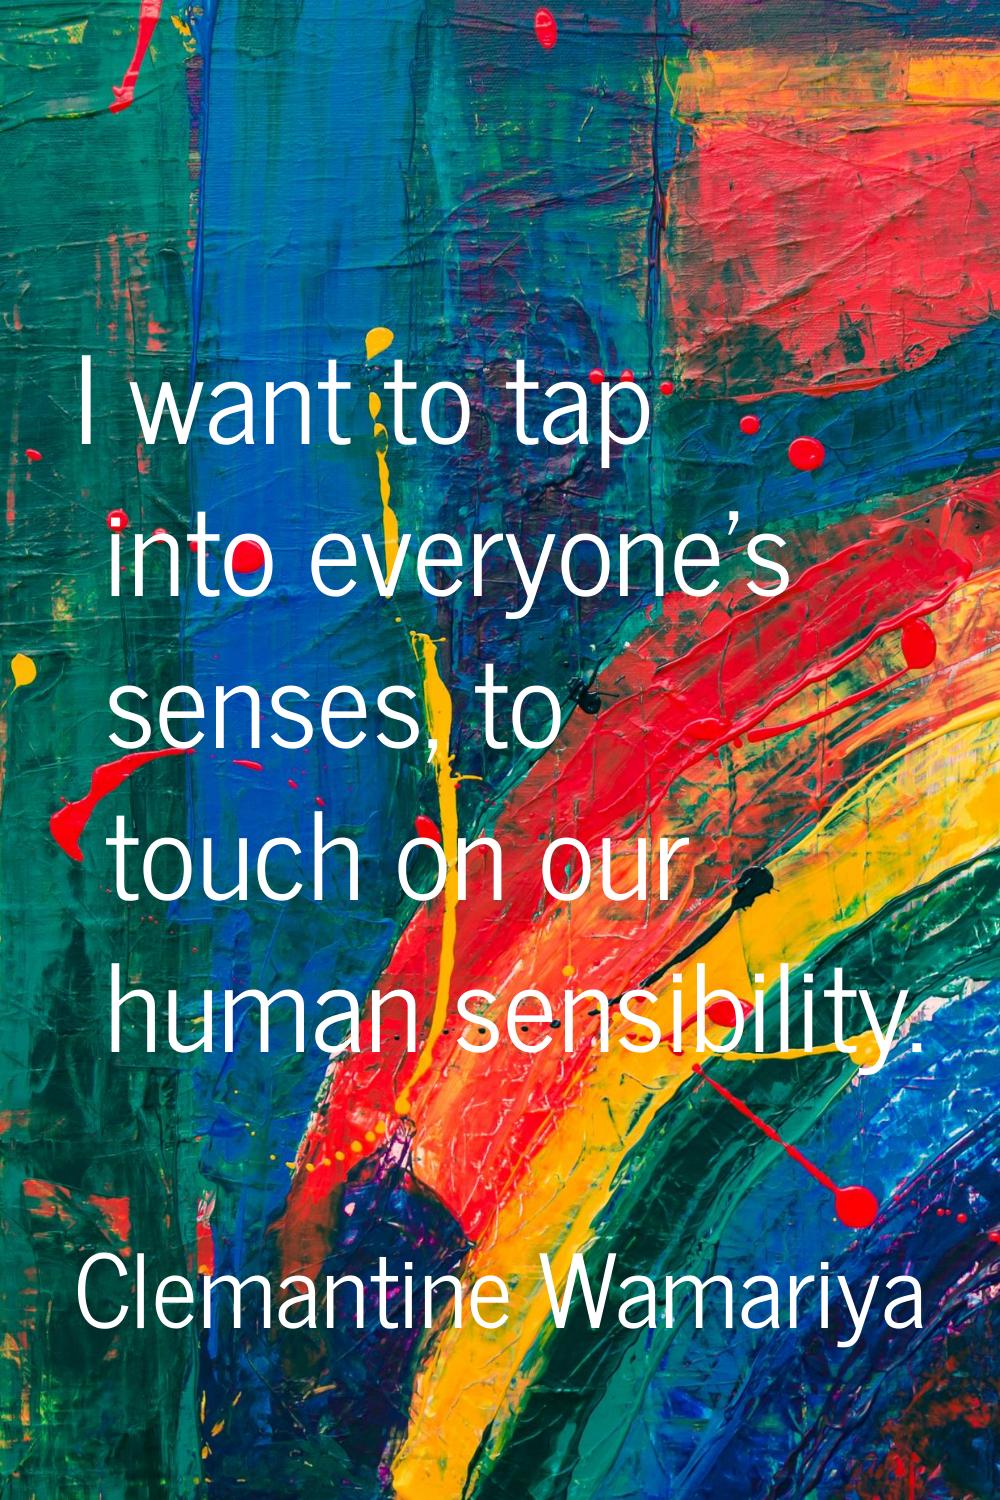 I want to tap into everyone's senses, to touch on our human sensibility.